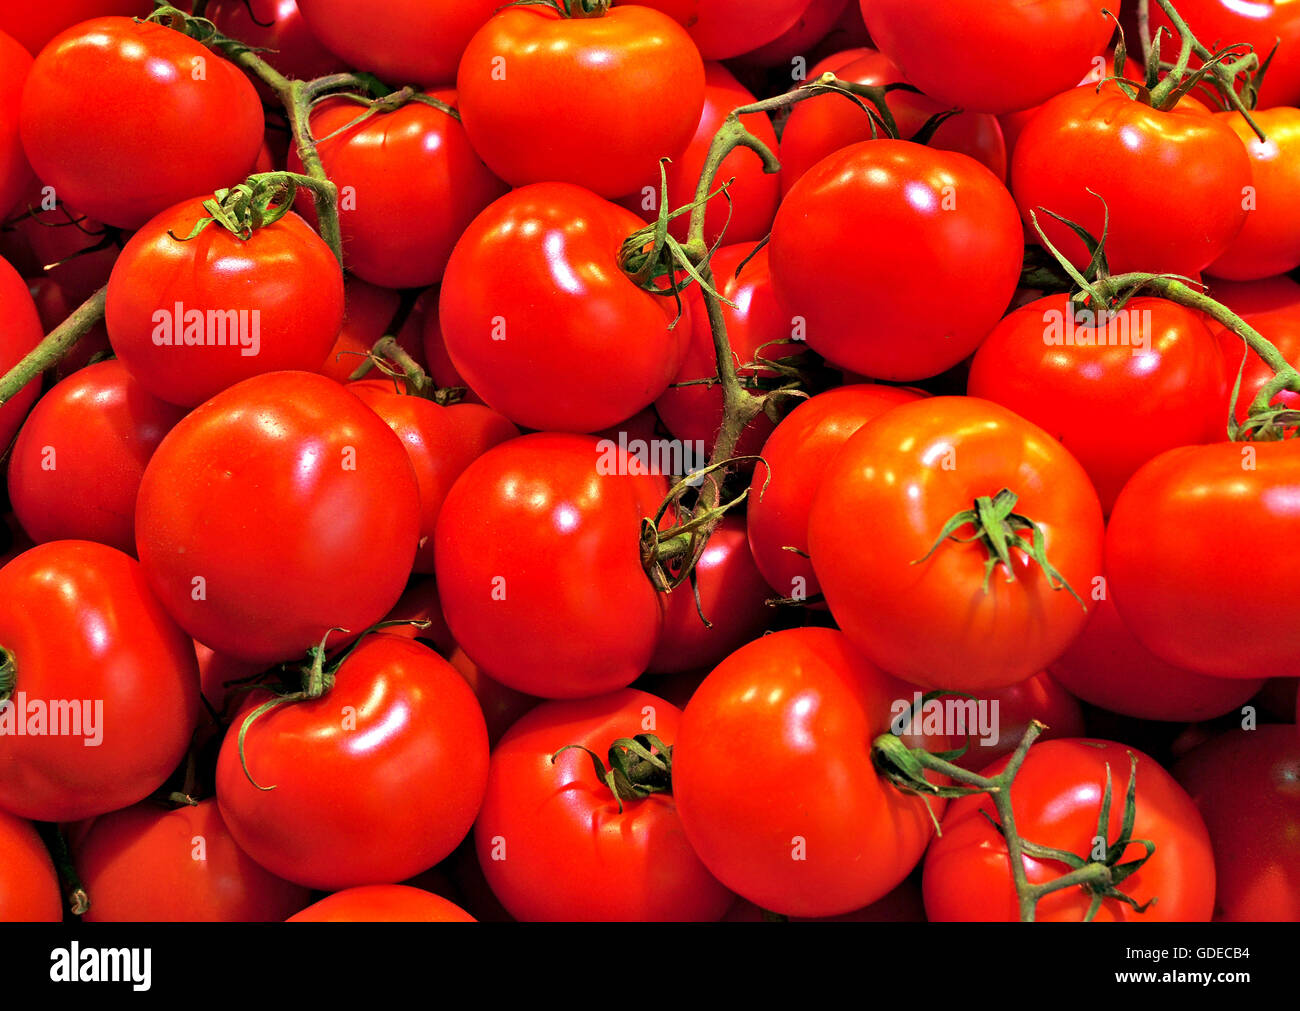 Red tomatoes background Stock Photo